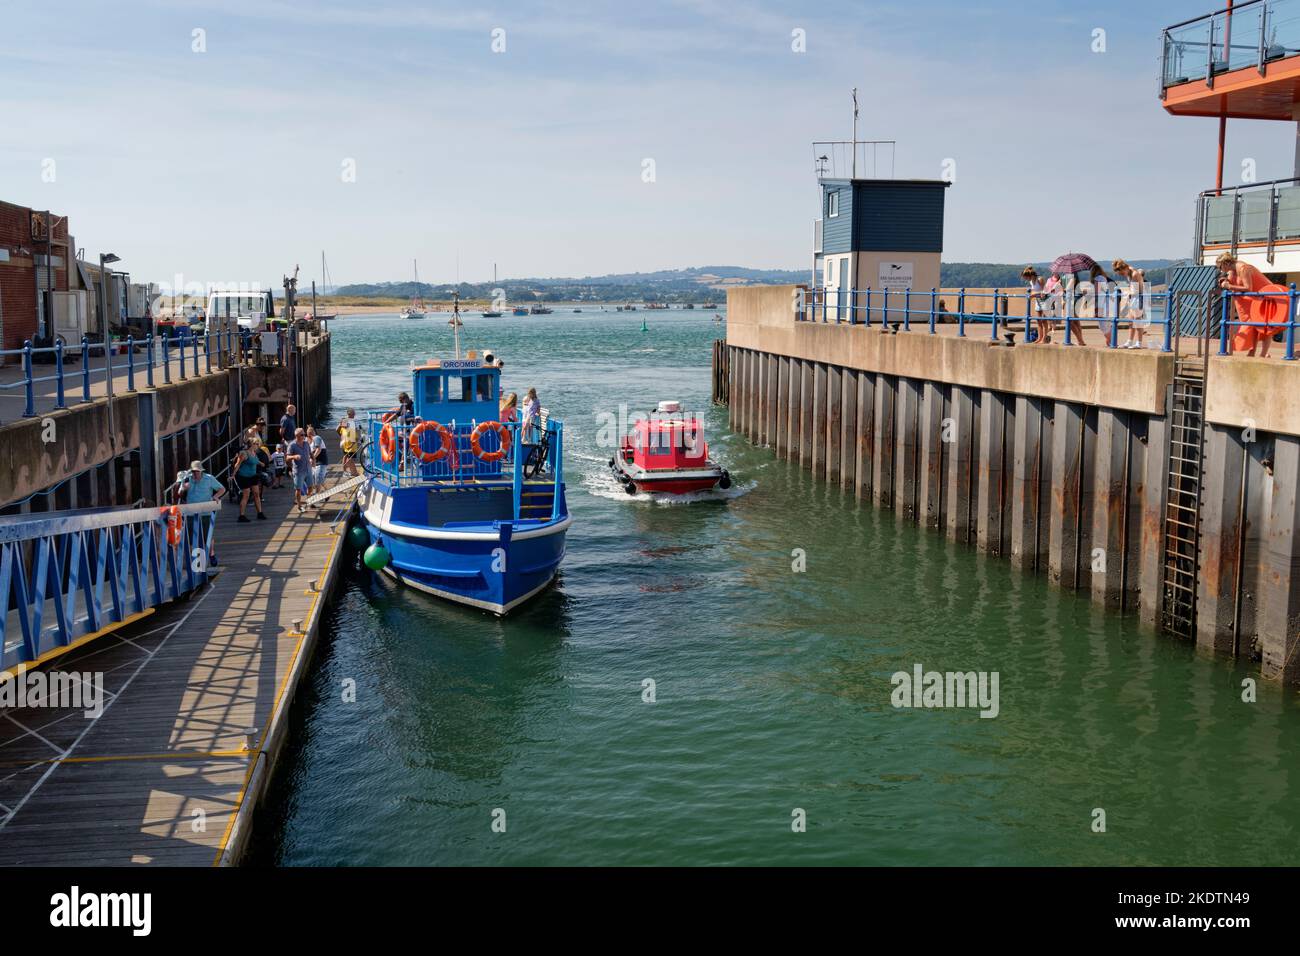 Starcross ferry boat Orcombe moored at Exmouth Landing as passengers get off, Exmouth, Devon, UK, August. Stock Photo